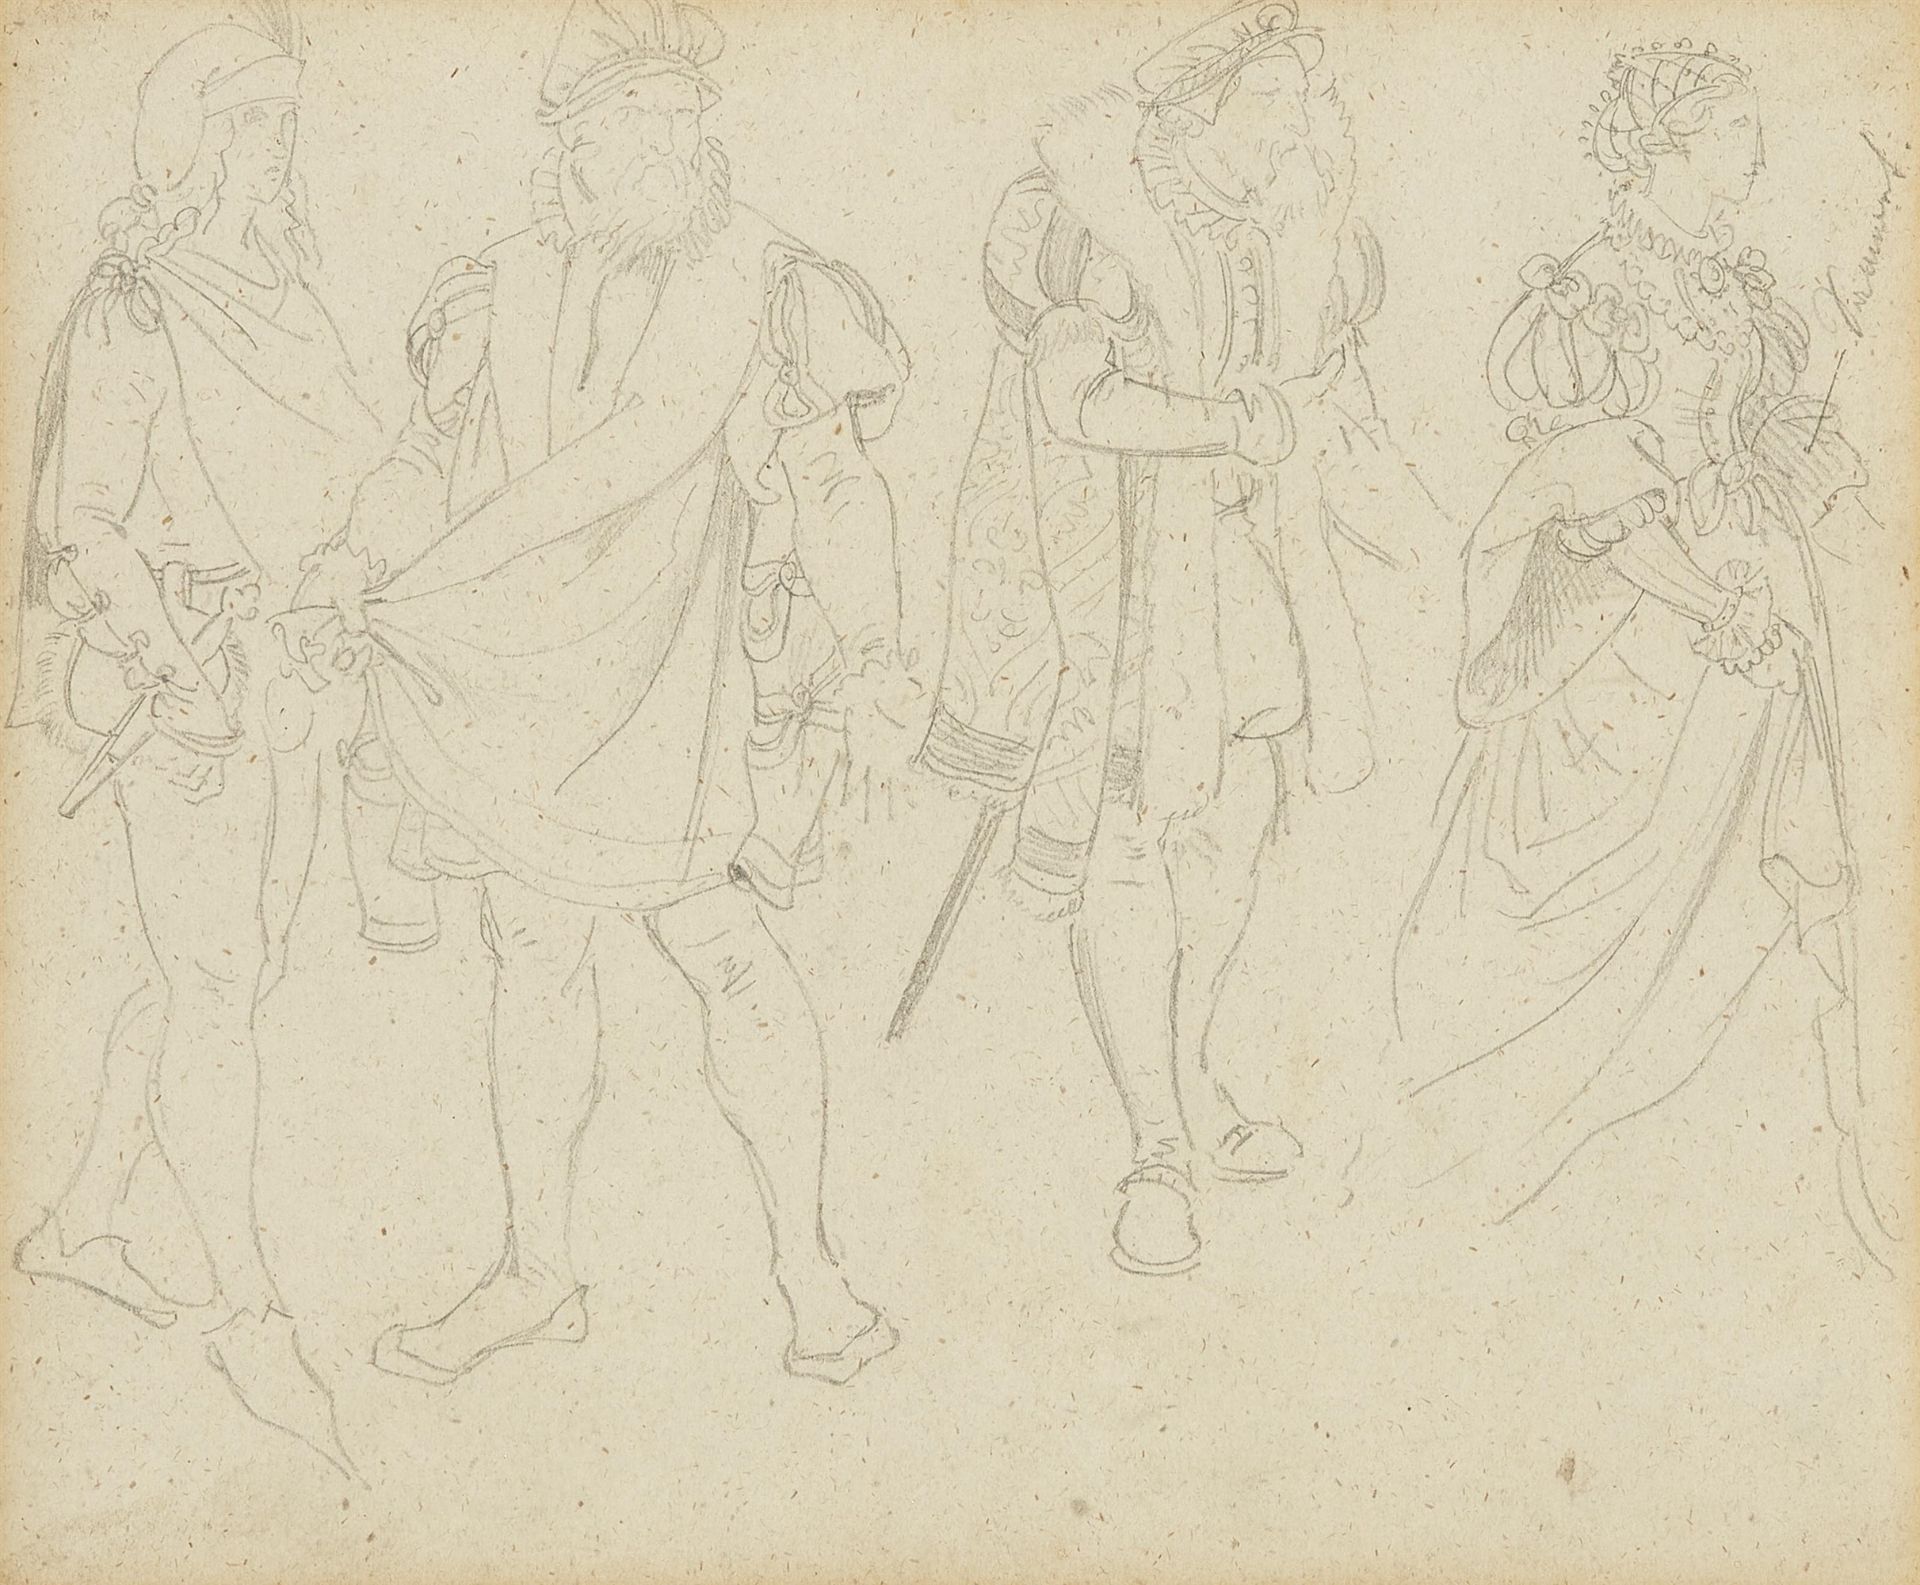 Adolph von Menzel, Studies of figures in historical costumes, double page